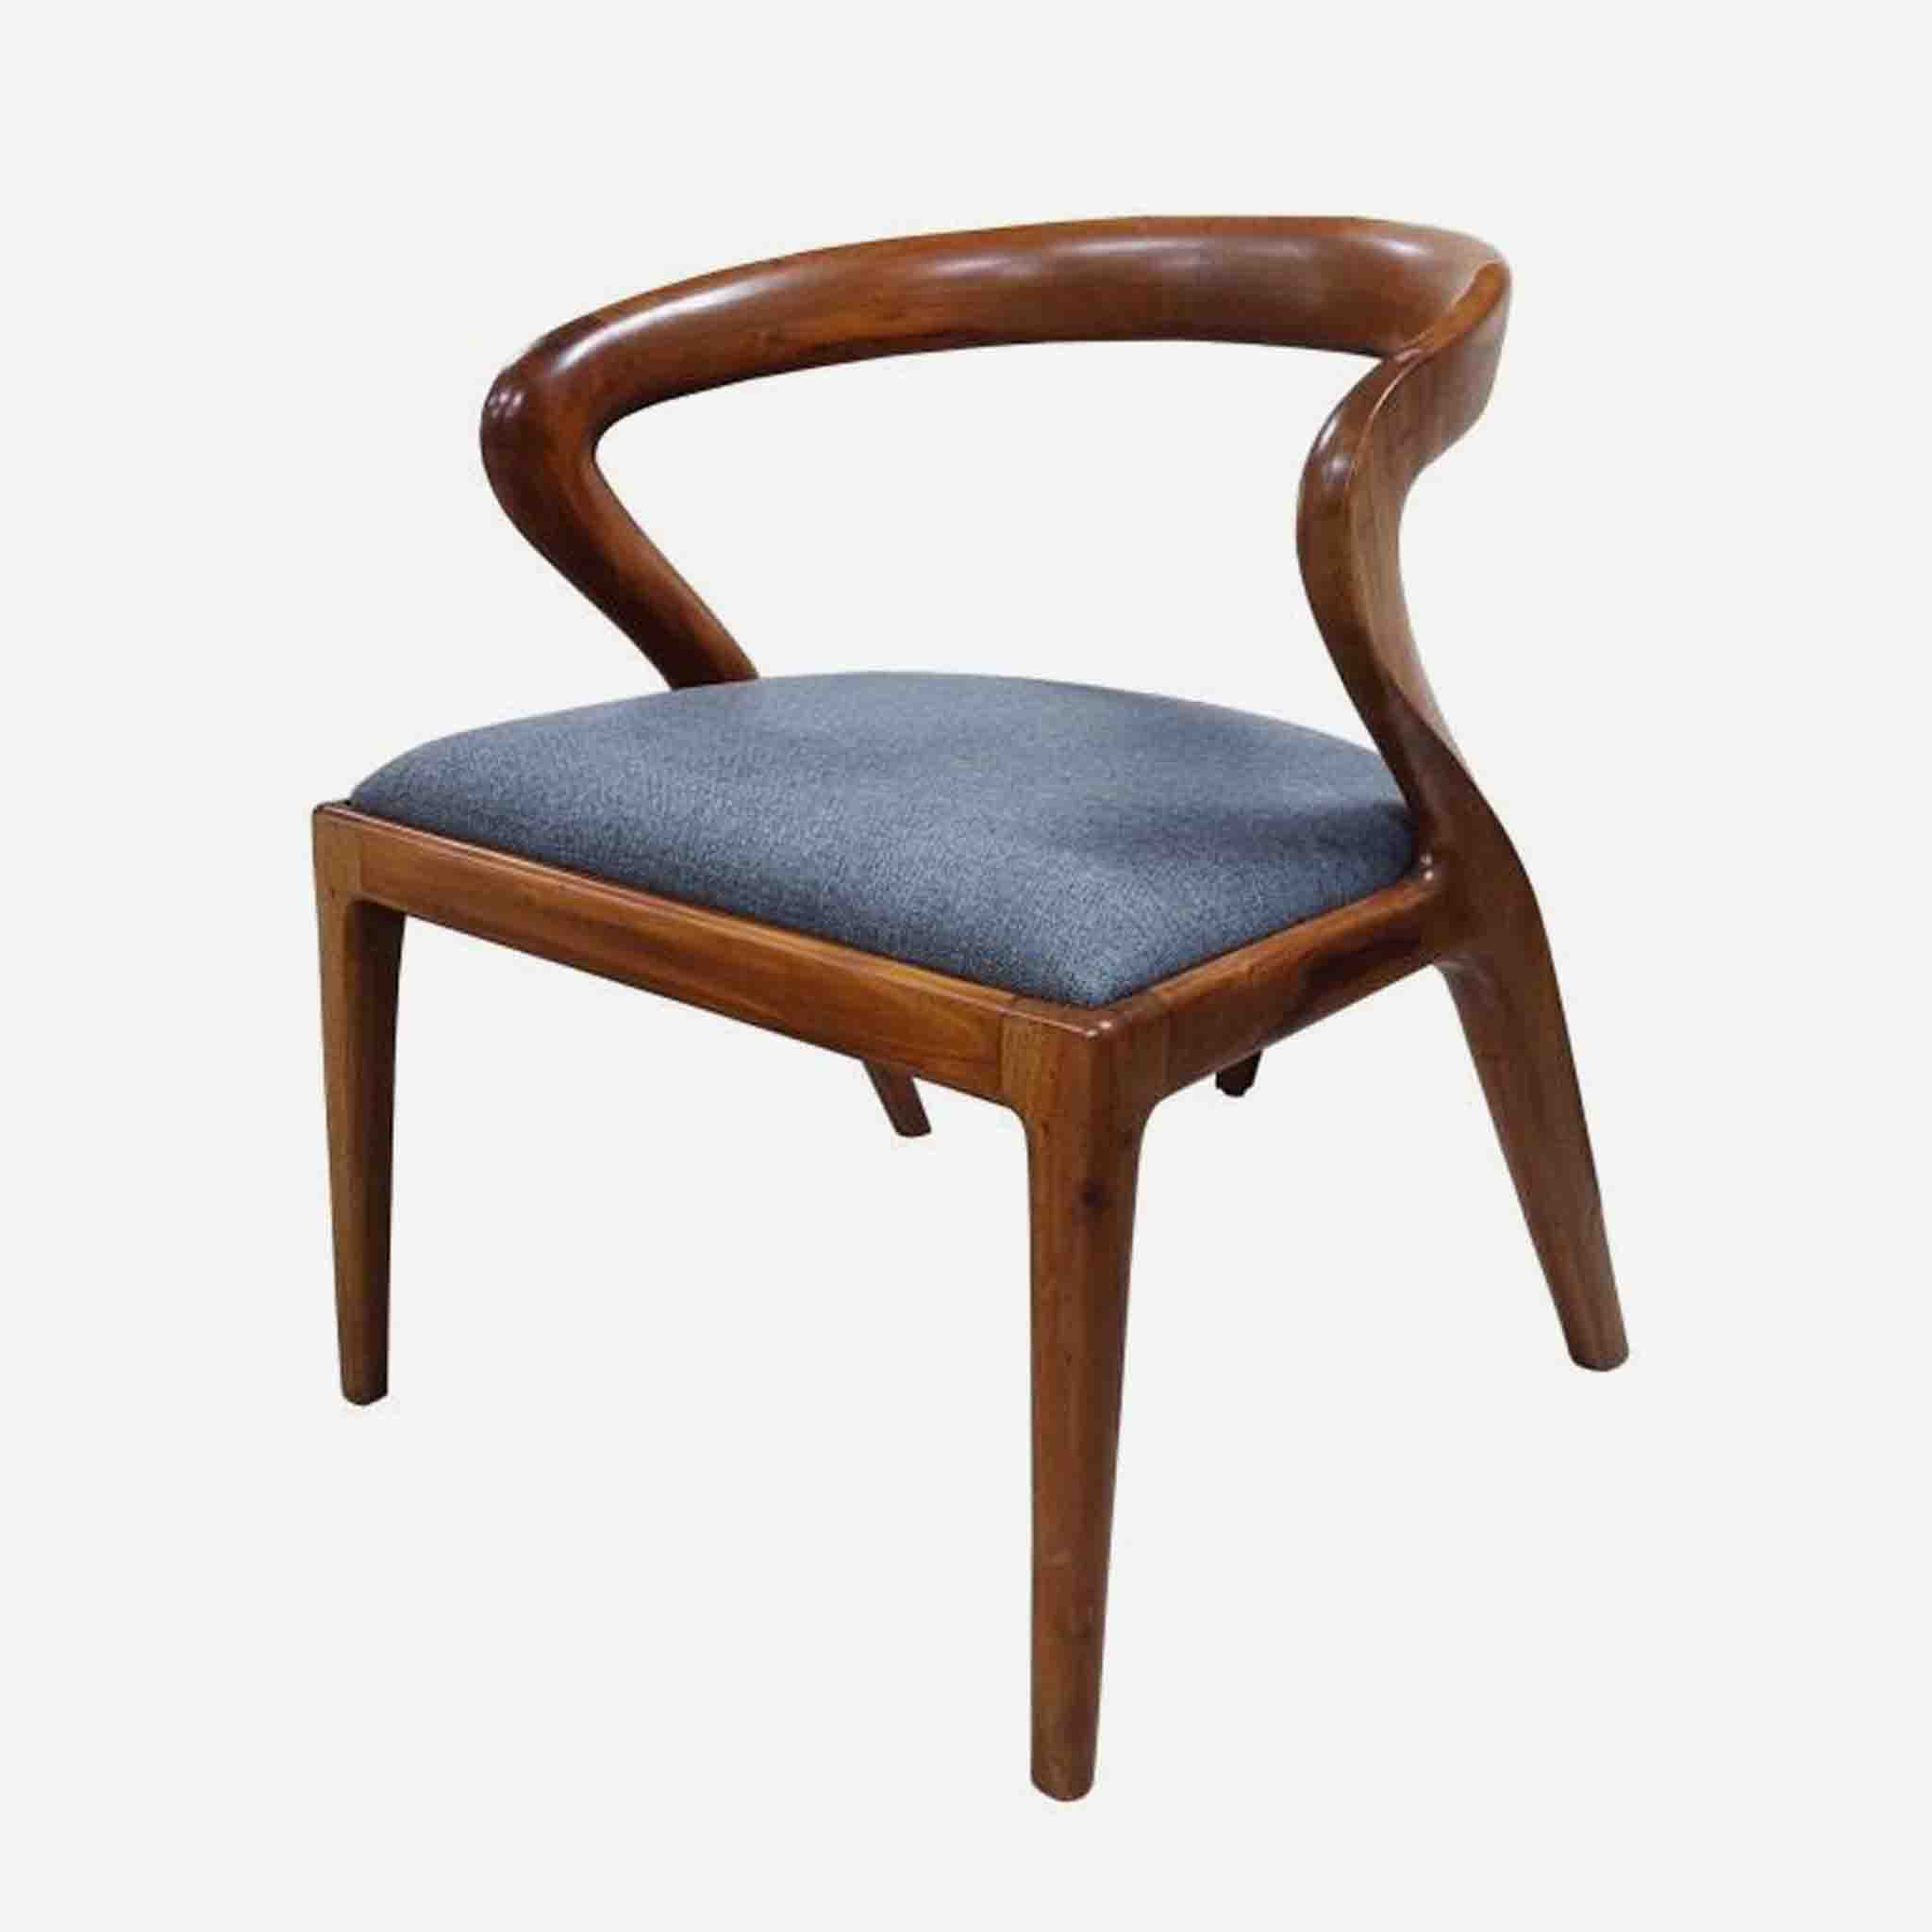 Dining Chair - High Quality, Custom-made Furniture - Manila, Philippines. Custom-made Chairs, Tables, Beds, Sofa, Cabinets, Handicraft, Woodworks.